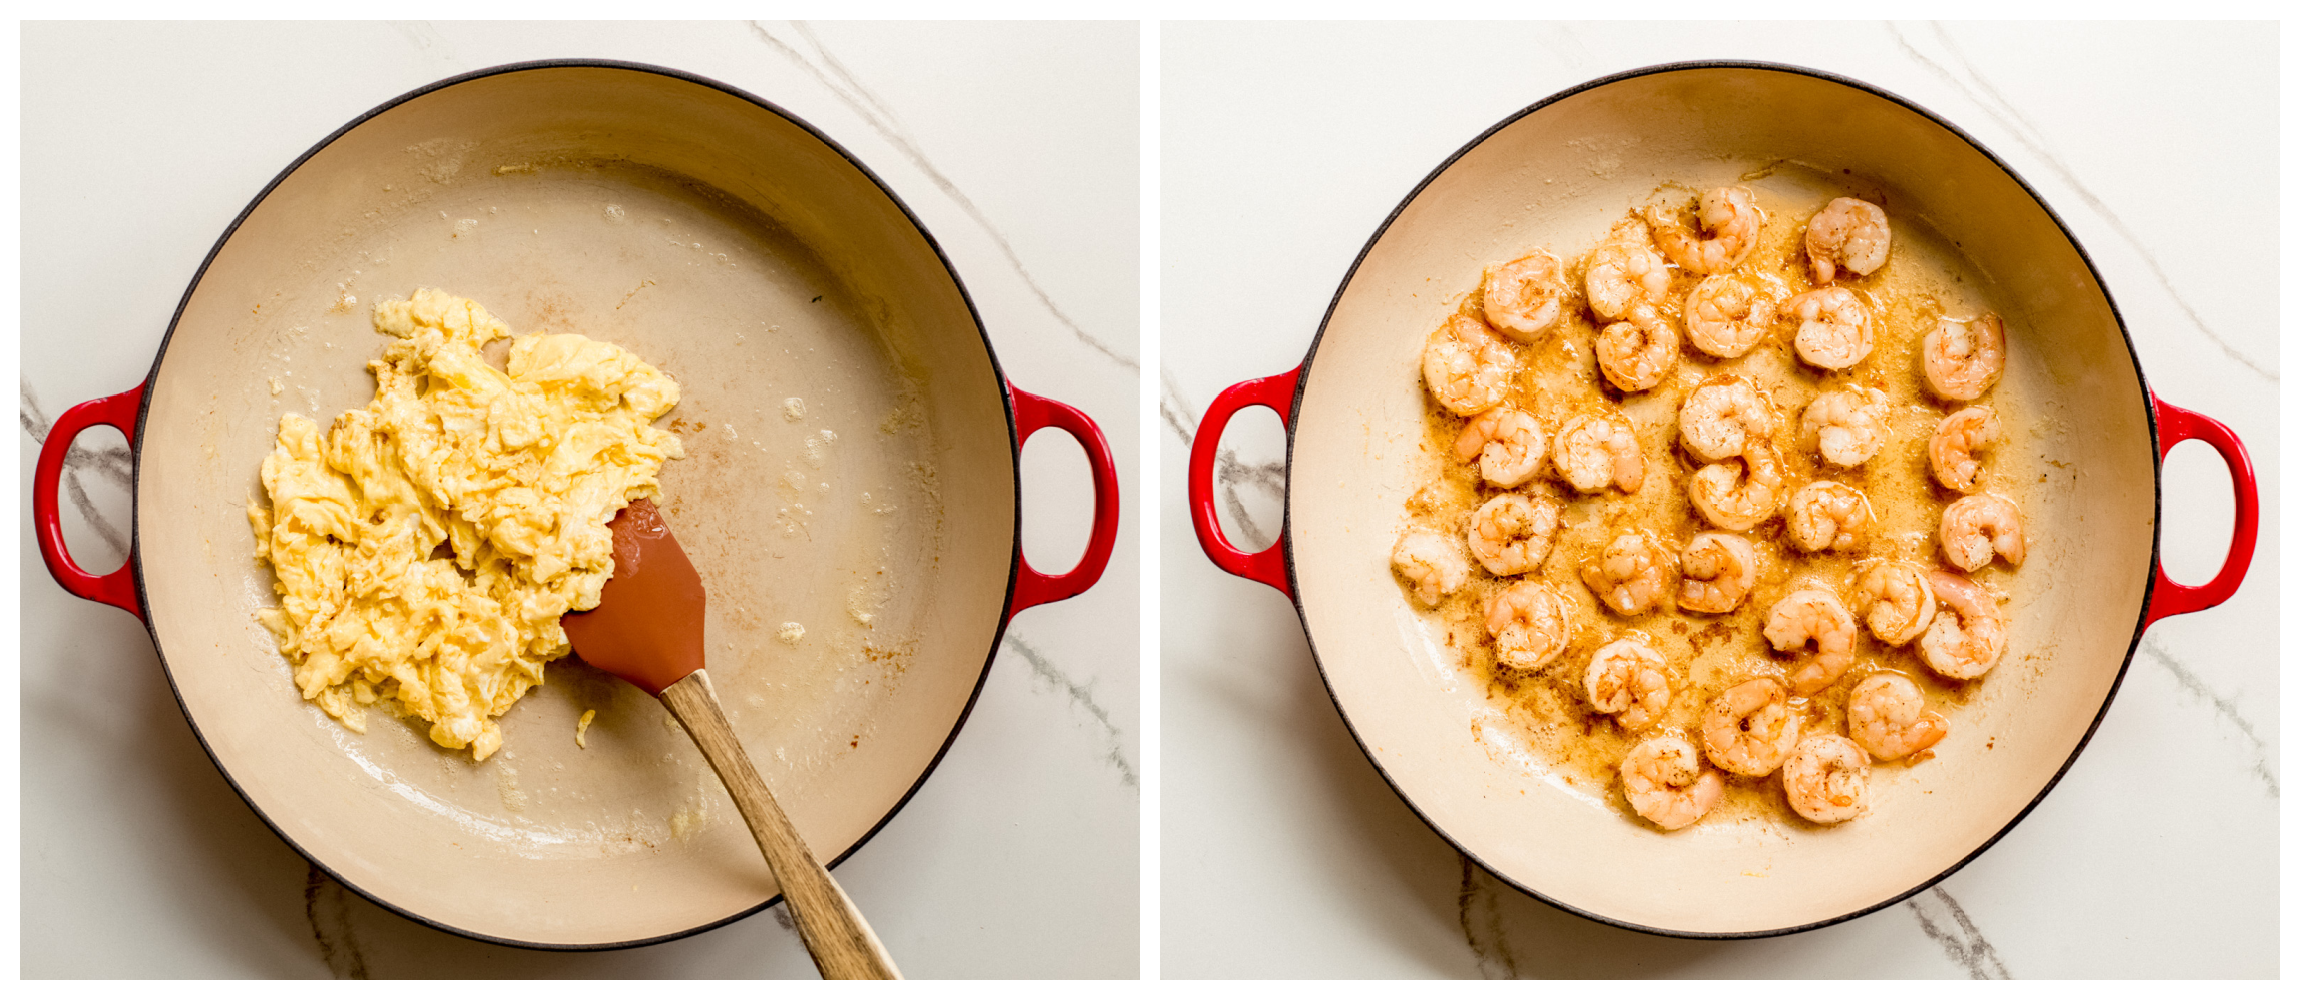 two saucepan photos showing scrambled eggs in one, and sauteed shrimp in the second.